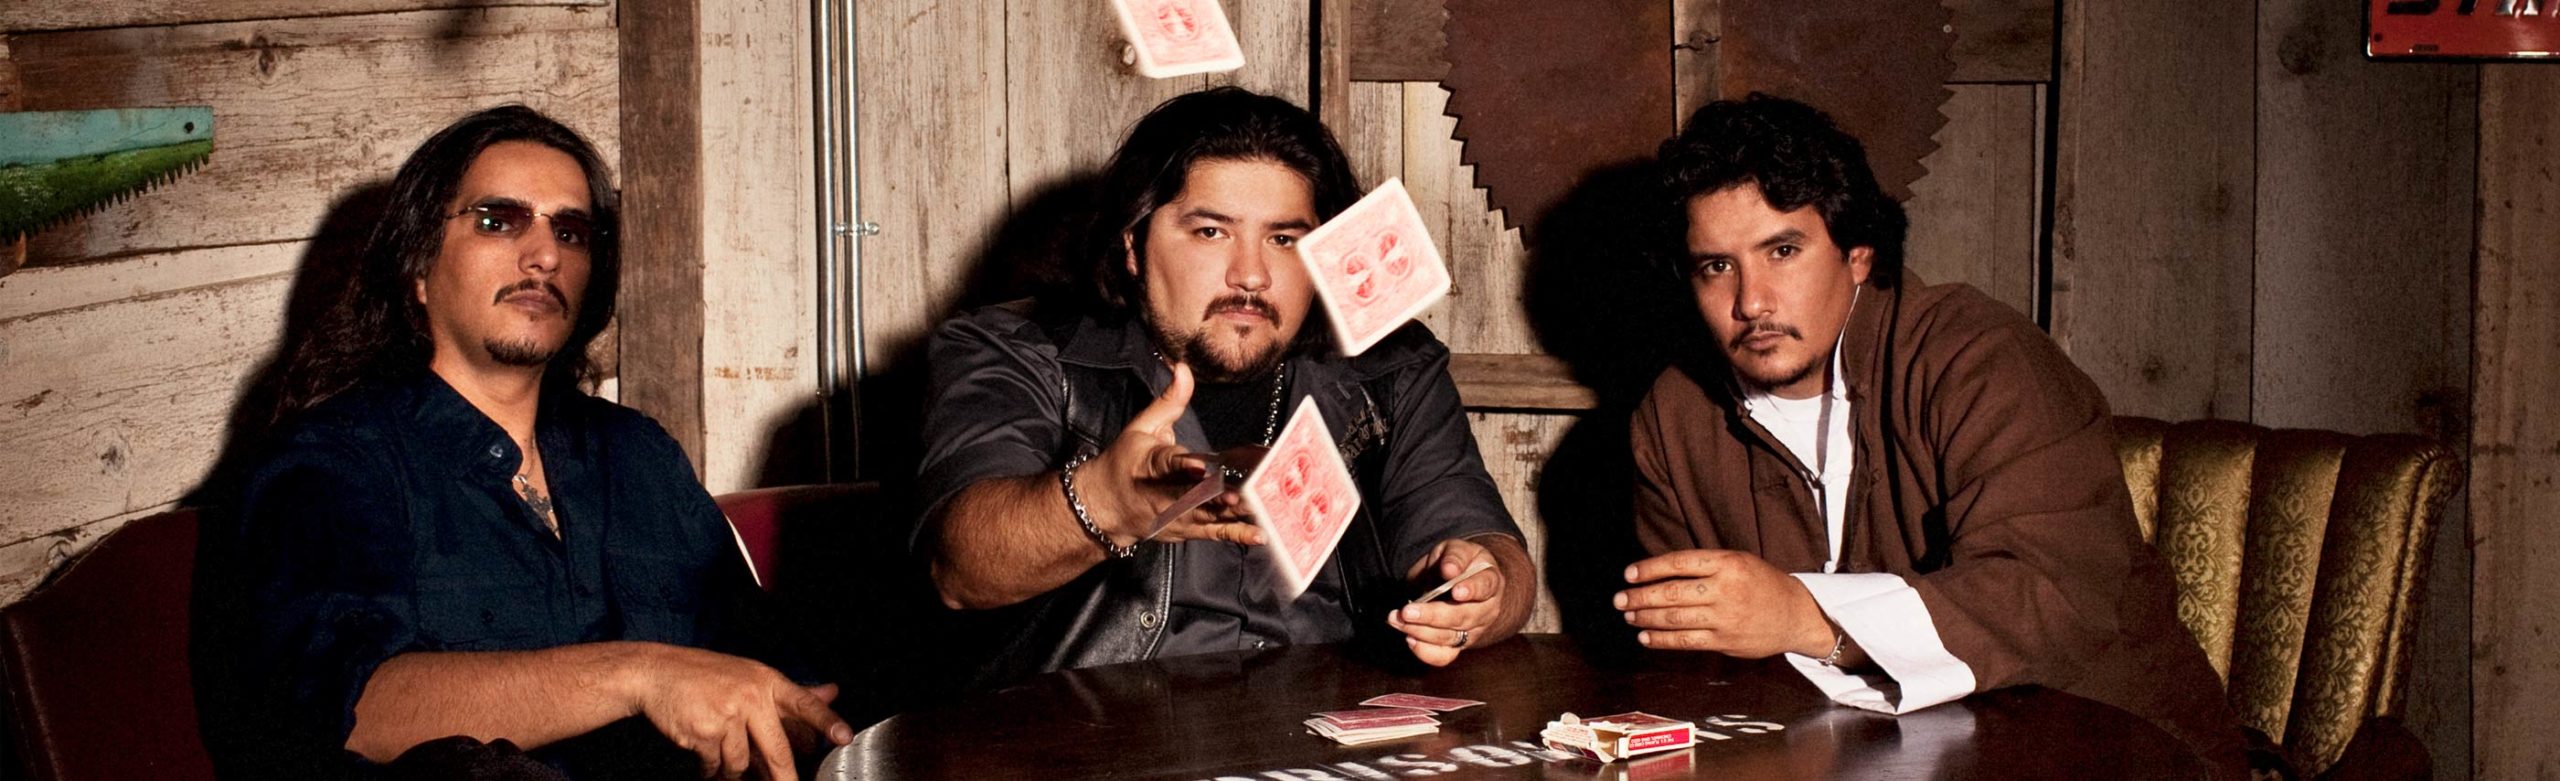 Canceled: Los Lonely Boys Image